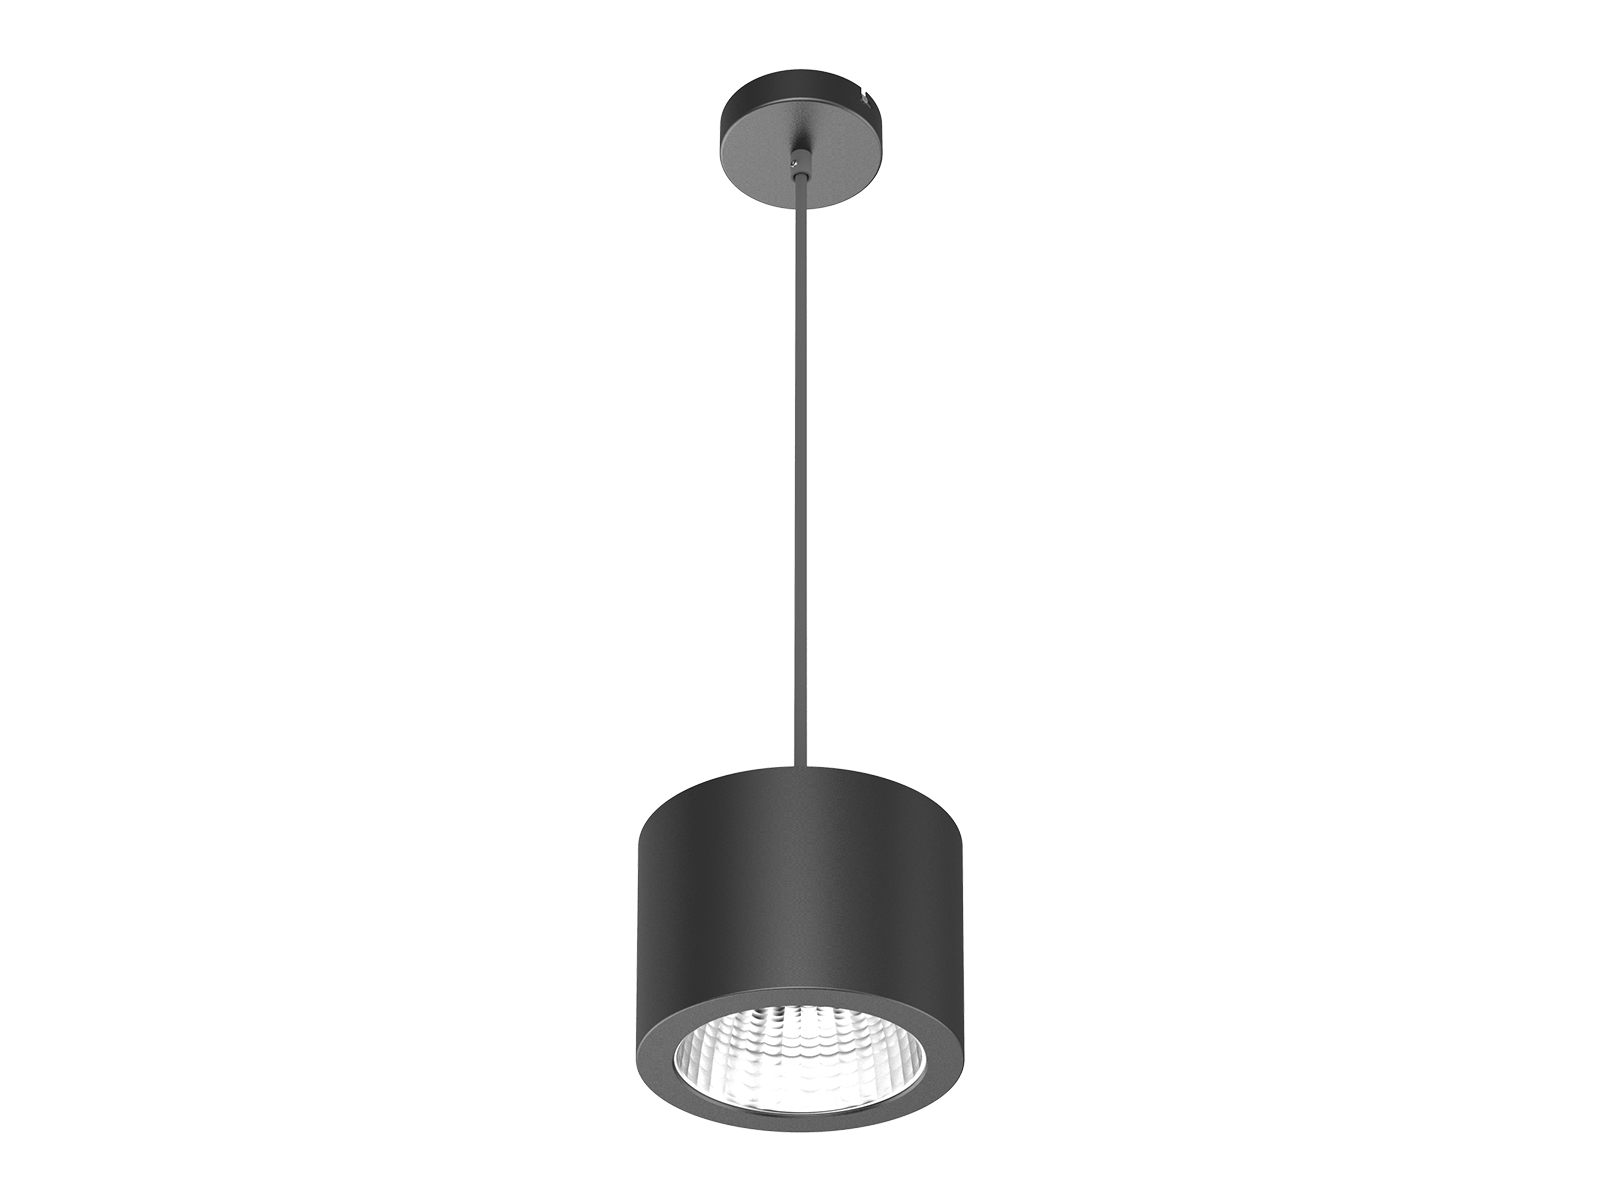 PD05 1 CCT Changeable LED Pendant Downlight